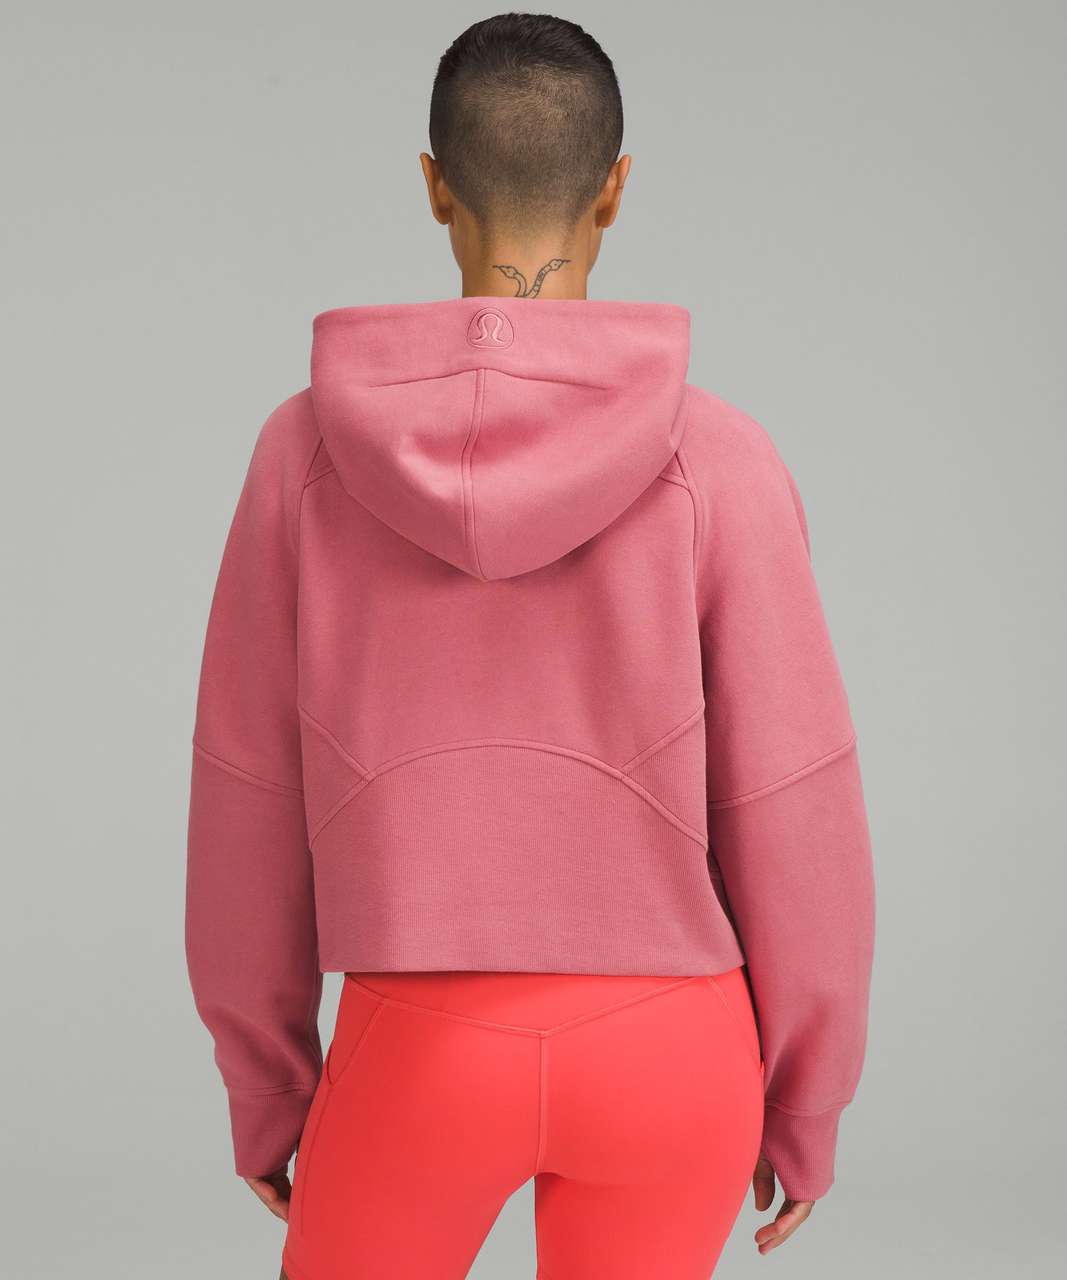 Lululemon Scuba Full-Zip Cropped Hoodie Size 8 LIP GLOSS Pink - SOLD OUT -  NWOT 